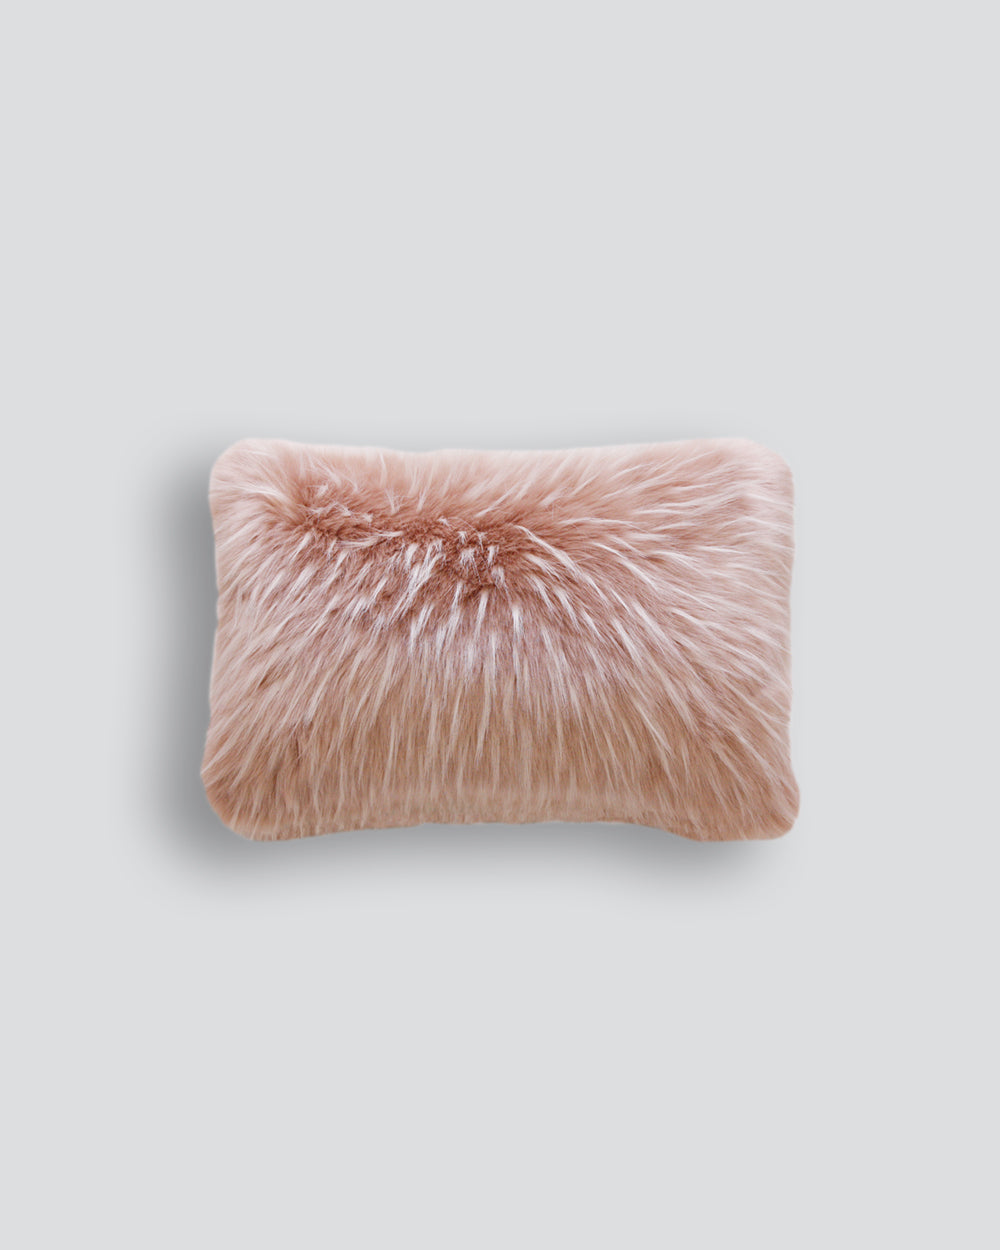 Heirloom Peony Plume Cushions in Faux Fur are available from Make Your House A Home Premium Stockist. Furniture Store Bendigo, Victoria. Australia Wide Delivery. Furtex Baya.